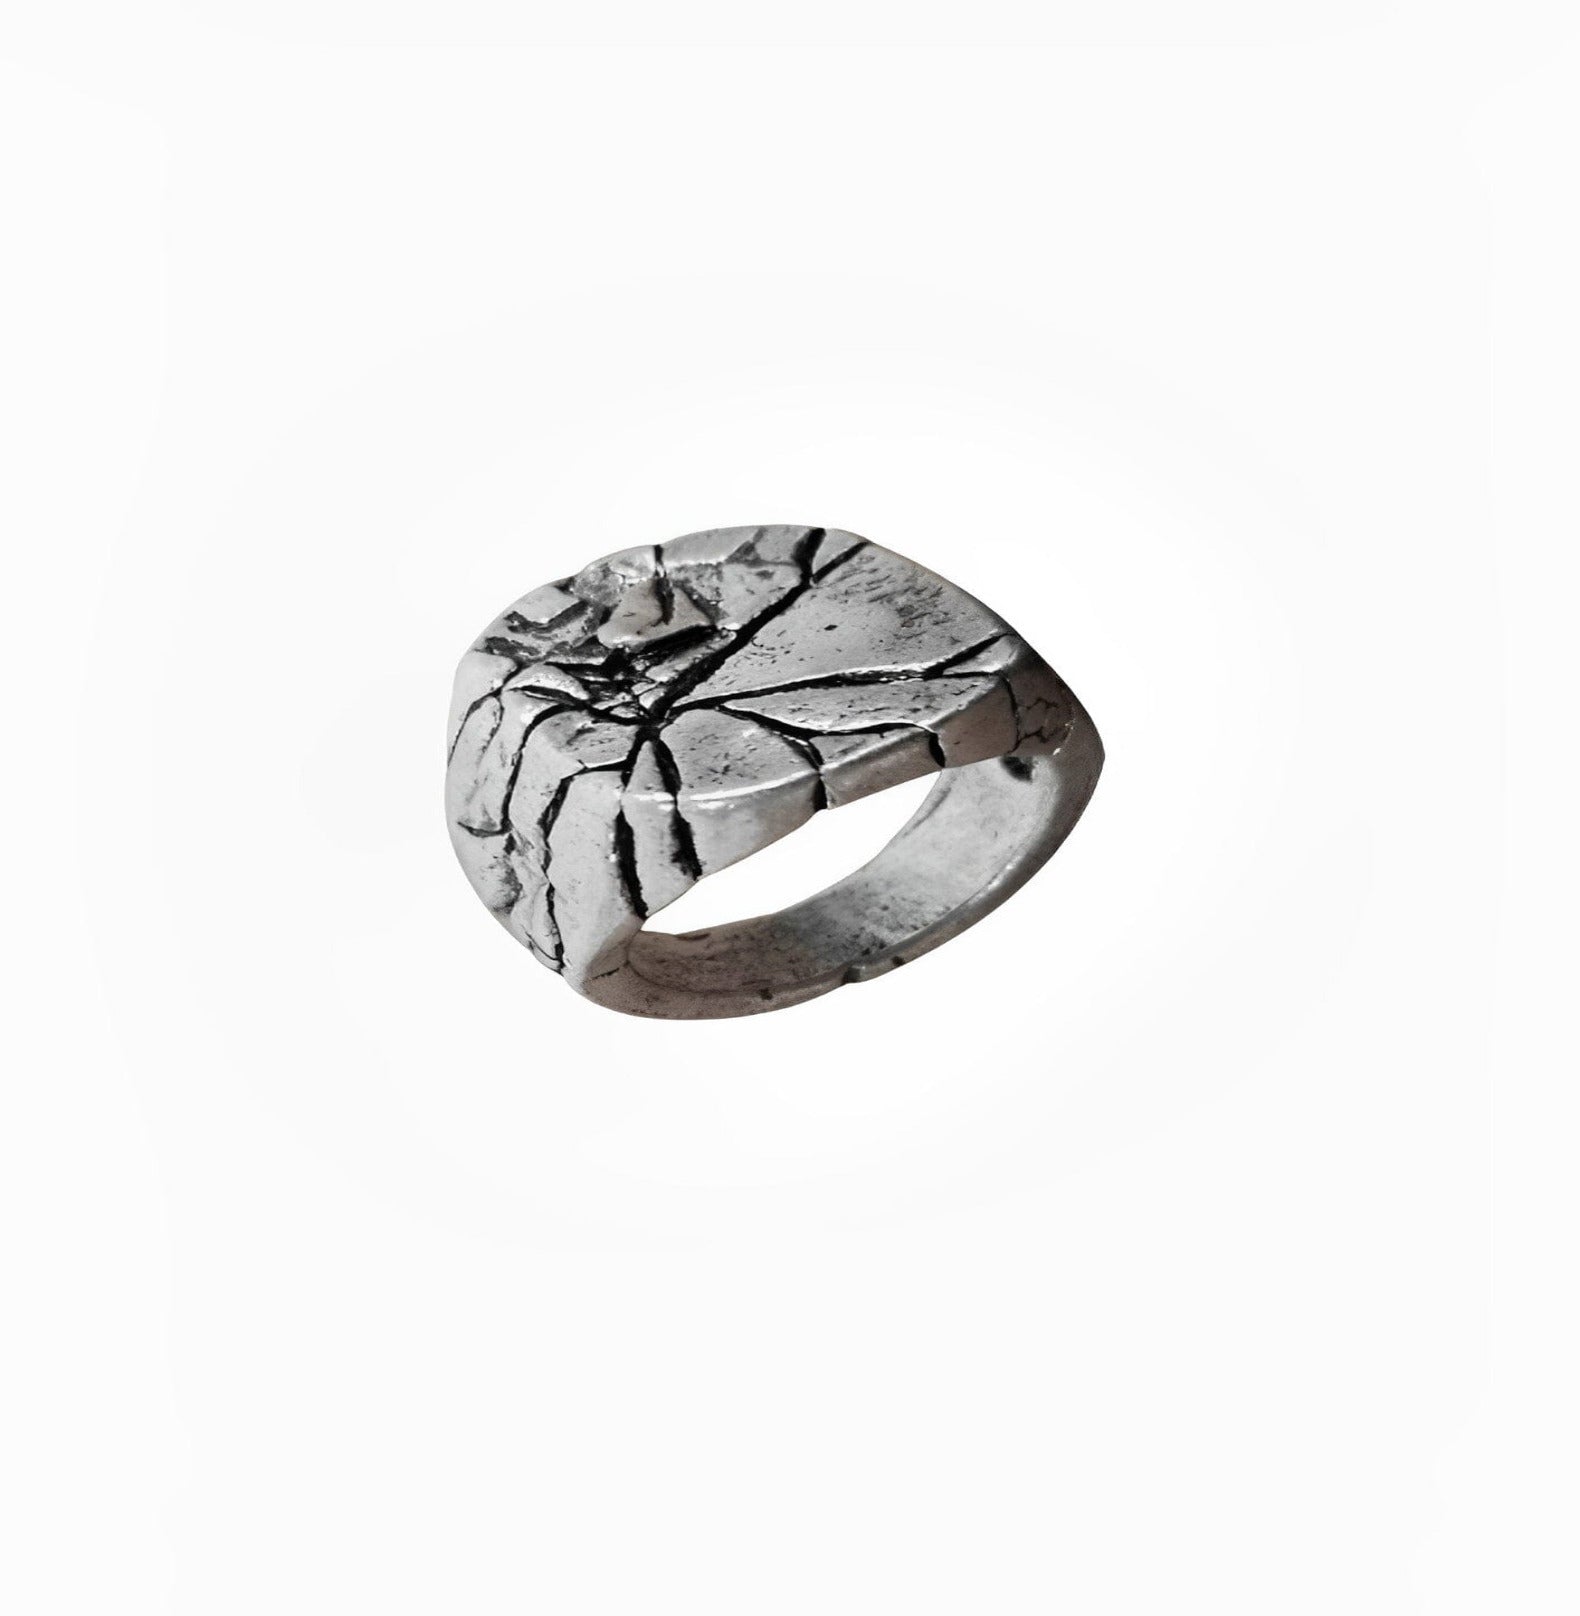 MIKHAS RING ring Yubama Jewelry Online Store - The Elegant Designs of Gold and Silver ! Silver 8 number 